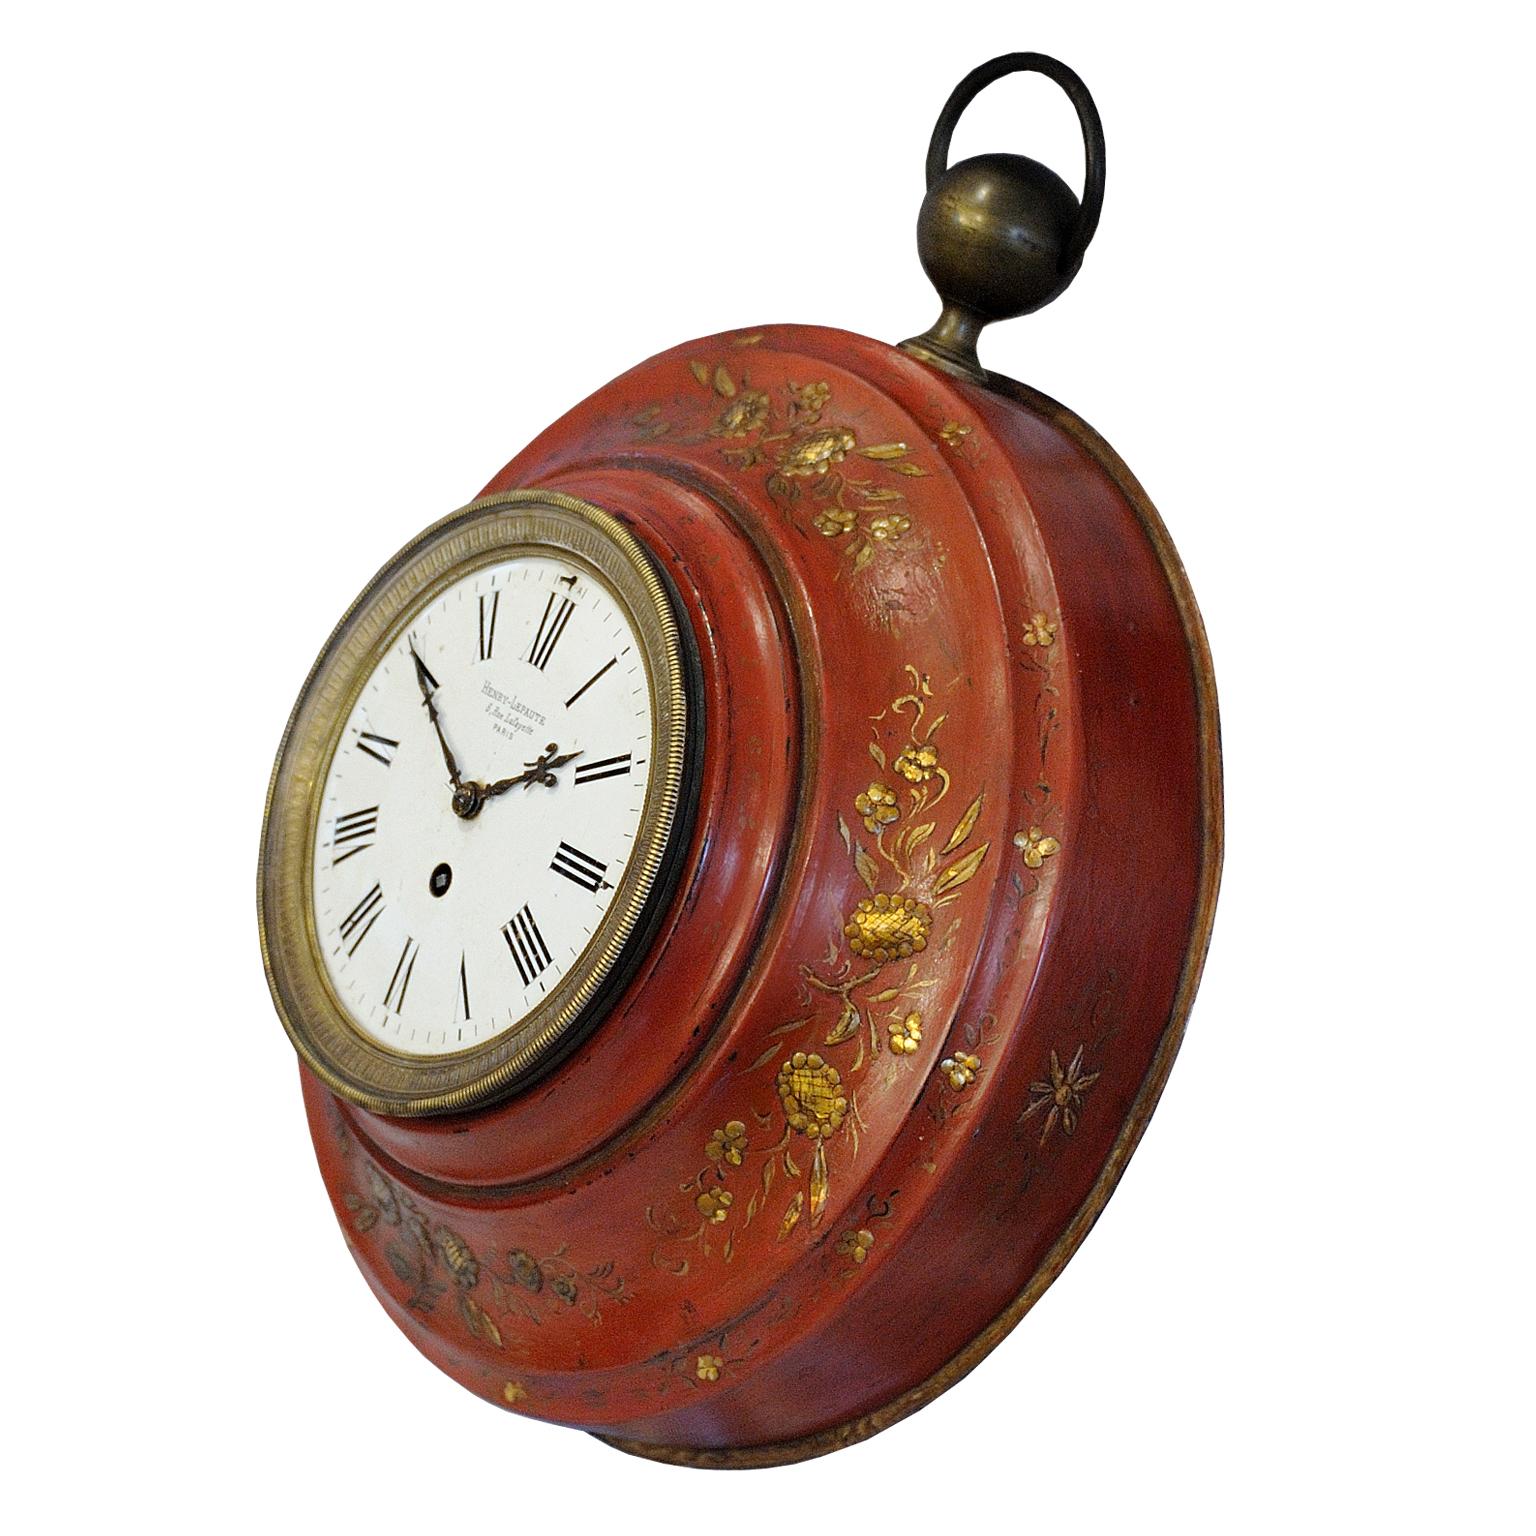 This is a beautifully decorated and hand painted French mid-19th century red tole wall clock by Henry-Lepaute, Paris, circa 1840.